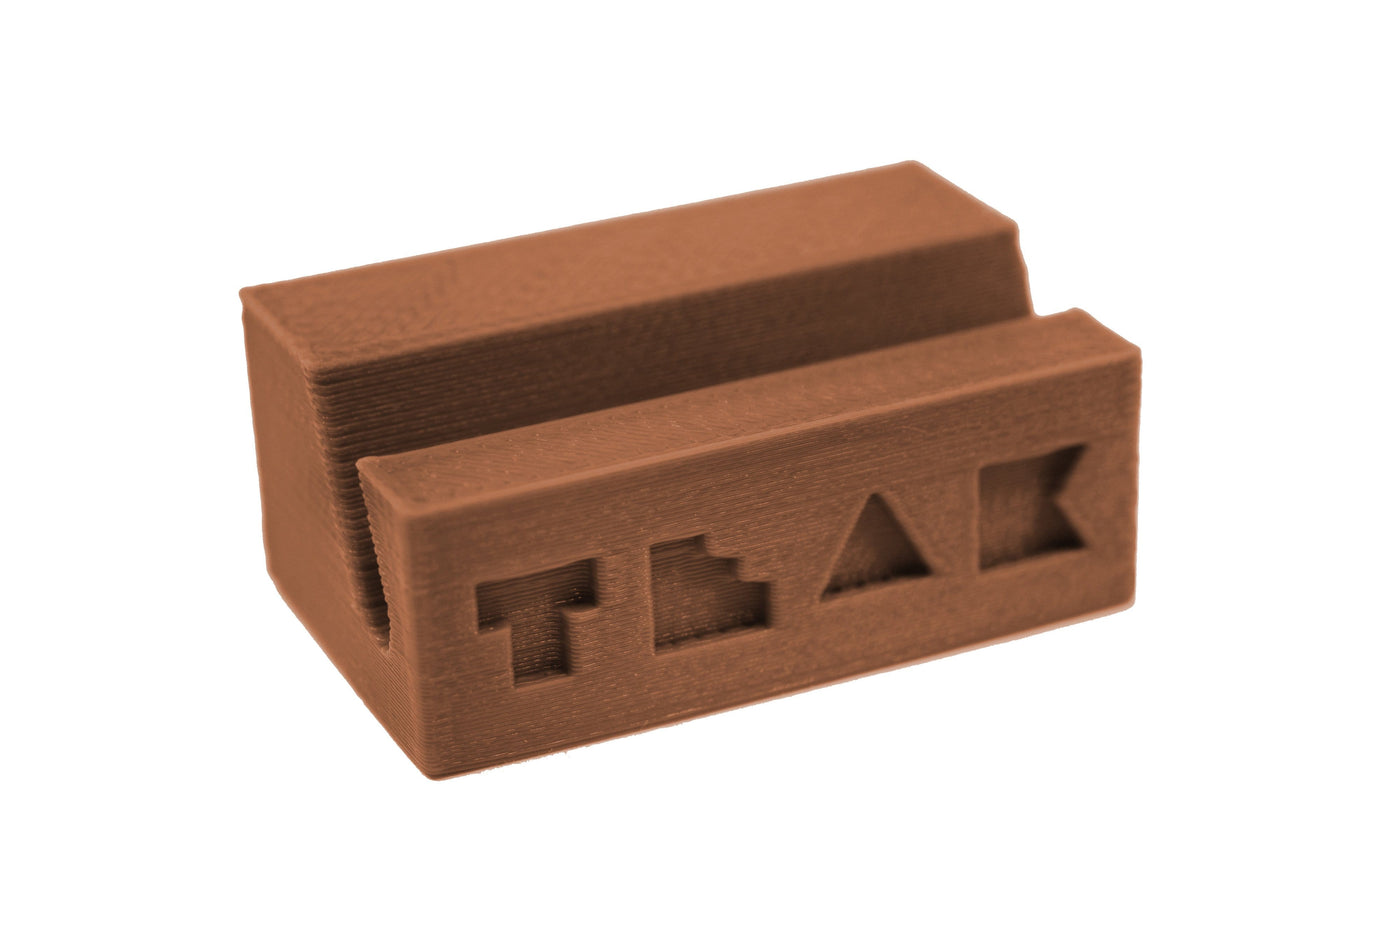 Teak Tuning Fingerboard Display Stand - Rectangle Edition - Sienna Brown Colorway